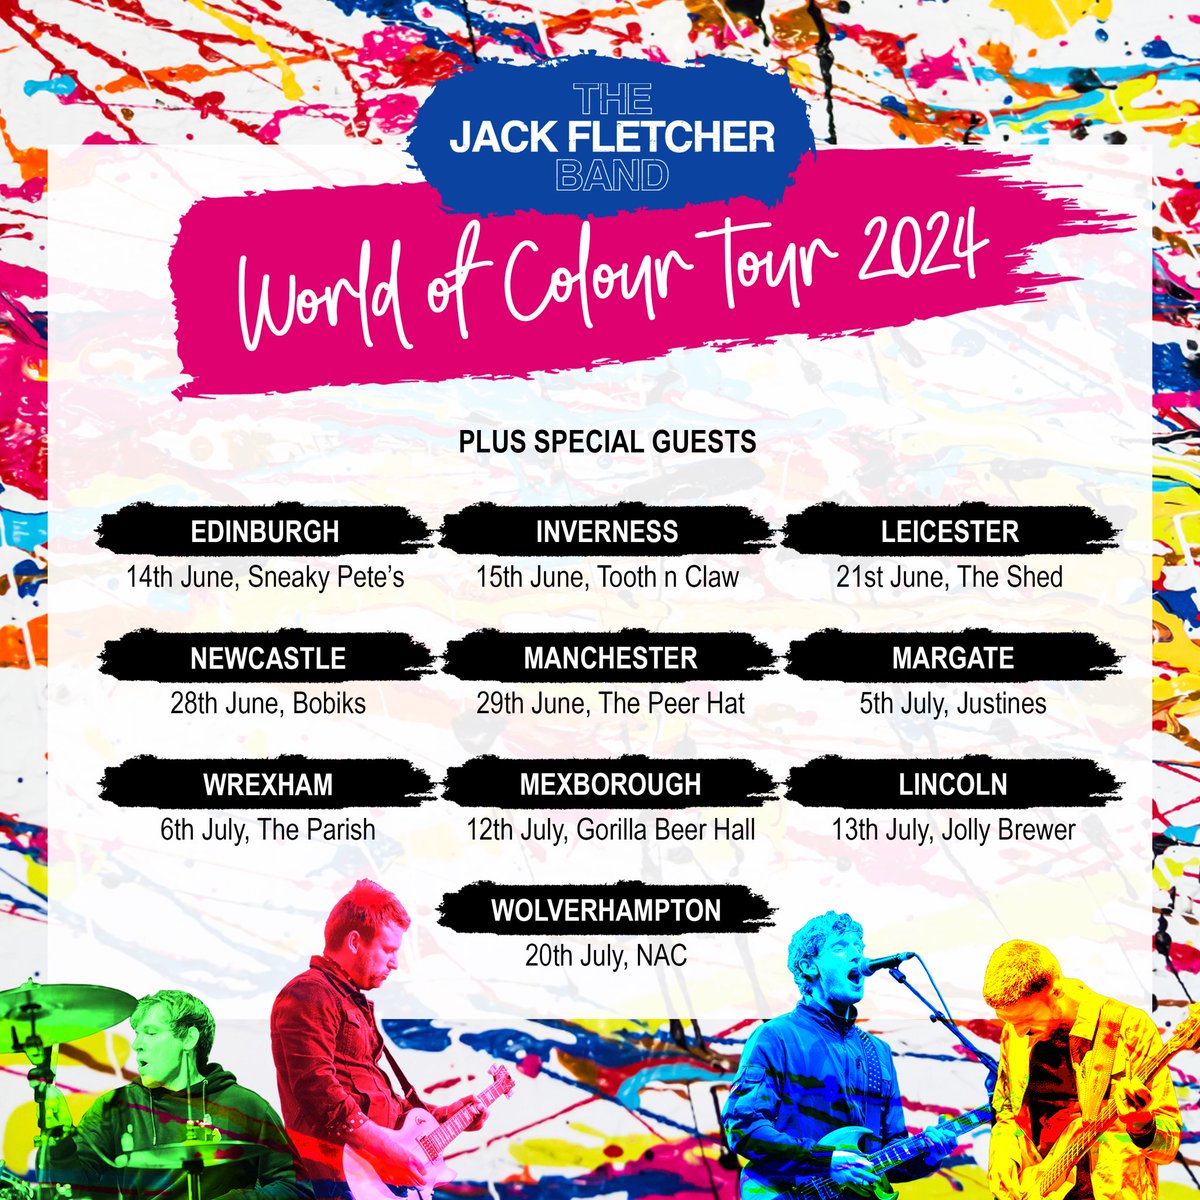 10 Weeks until our album “World of Colour” is released and we hit the road for our UK Tour Tickets & Album Pre-Order ⬇️ thejackfletcherband.com